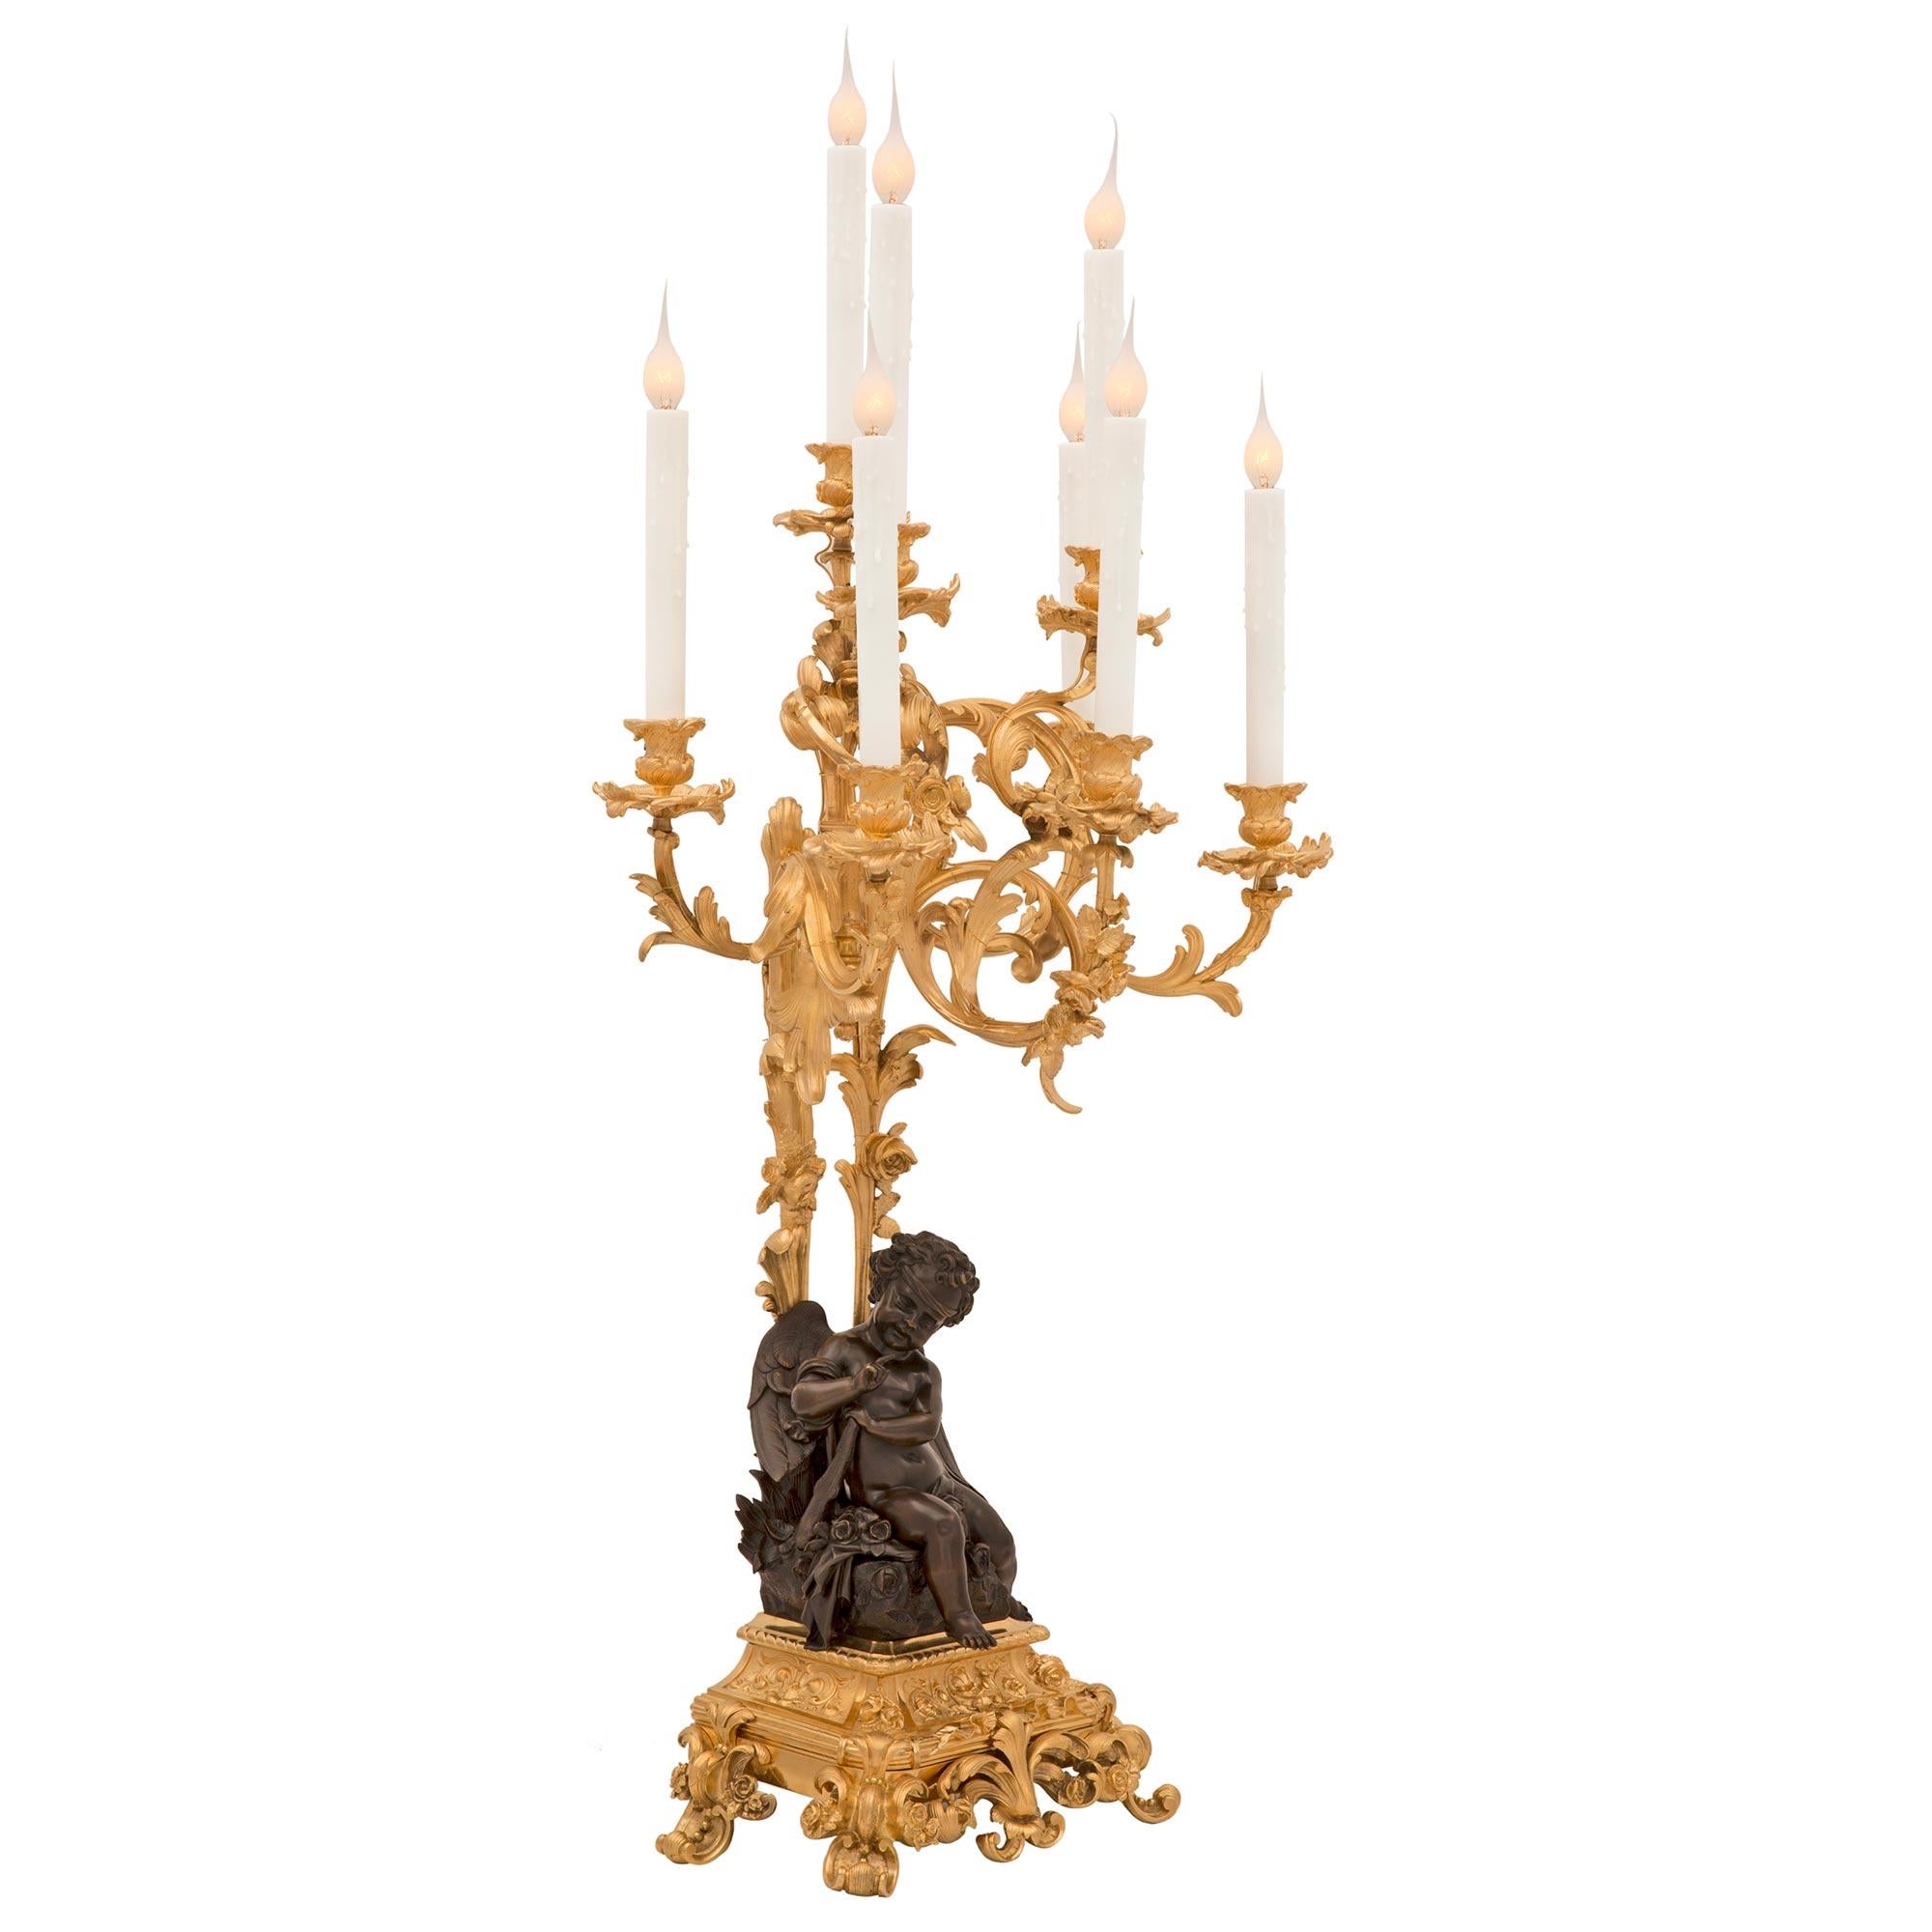 A stunning and extremely high quality true pair of French 19th century Louis XVI st. ormolu and patinated bronze candelabra lamps. Each eight arm lamp is raised by a stunning wonderfully executed base with luxuriant scrolled foliate designs,